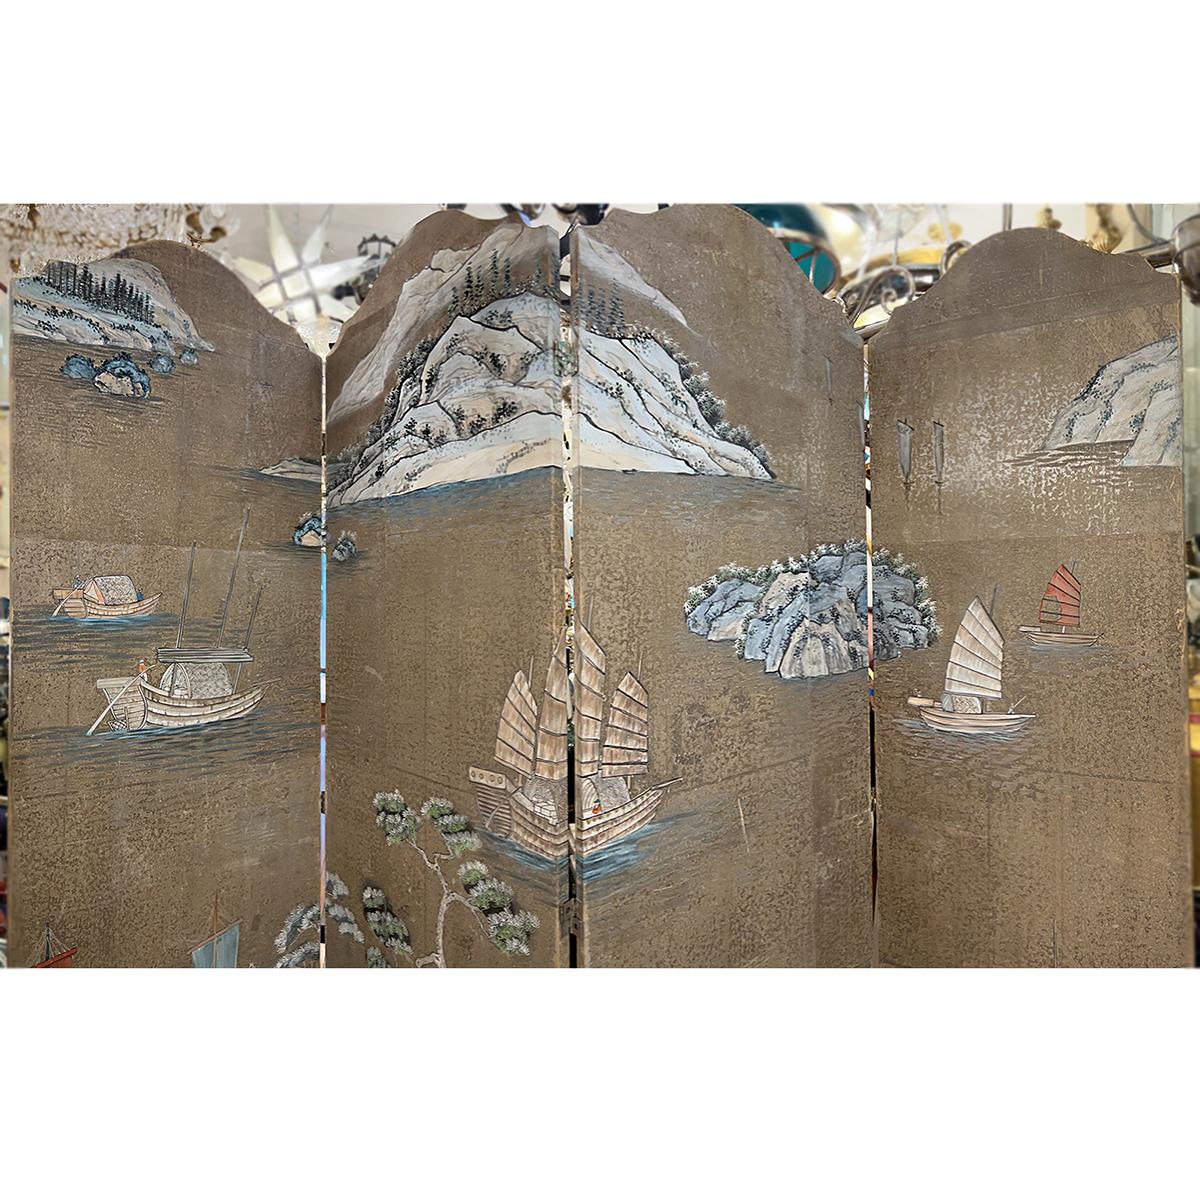 A 1940s chinoiserie decorated screen with landscape motif on a silver and gold background.
Measurements:
Height: 84